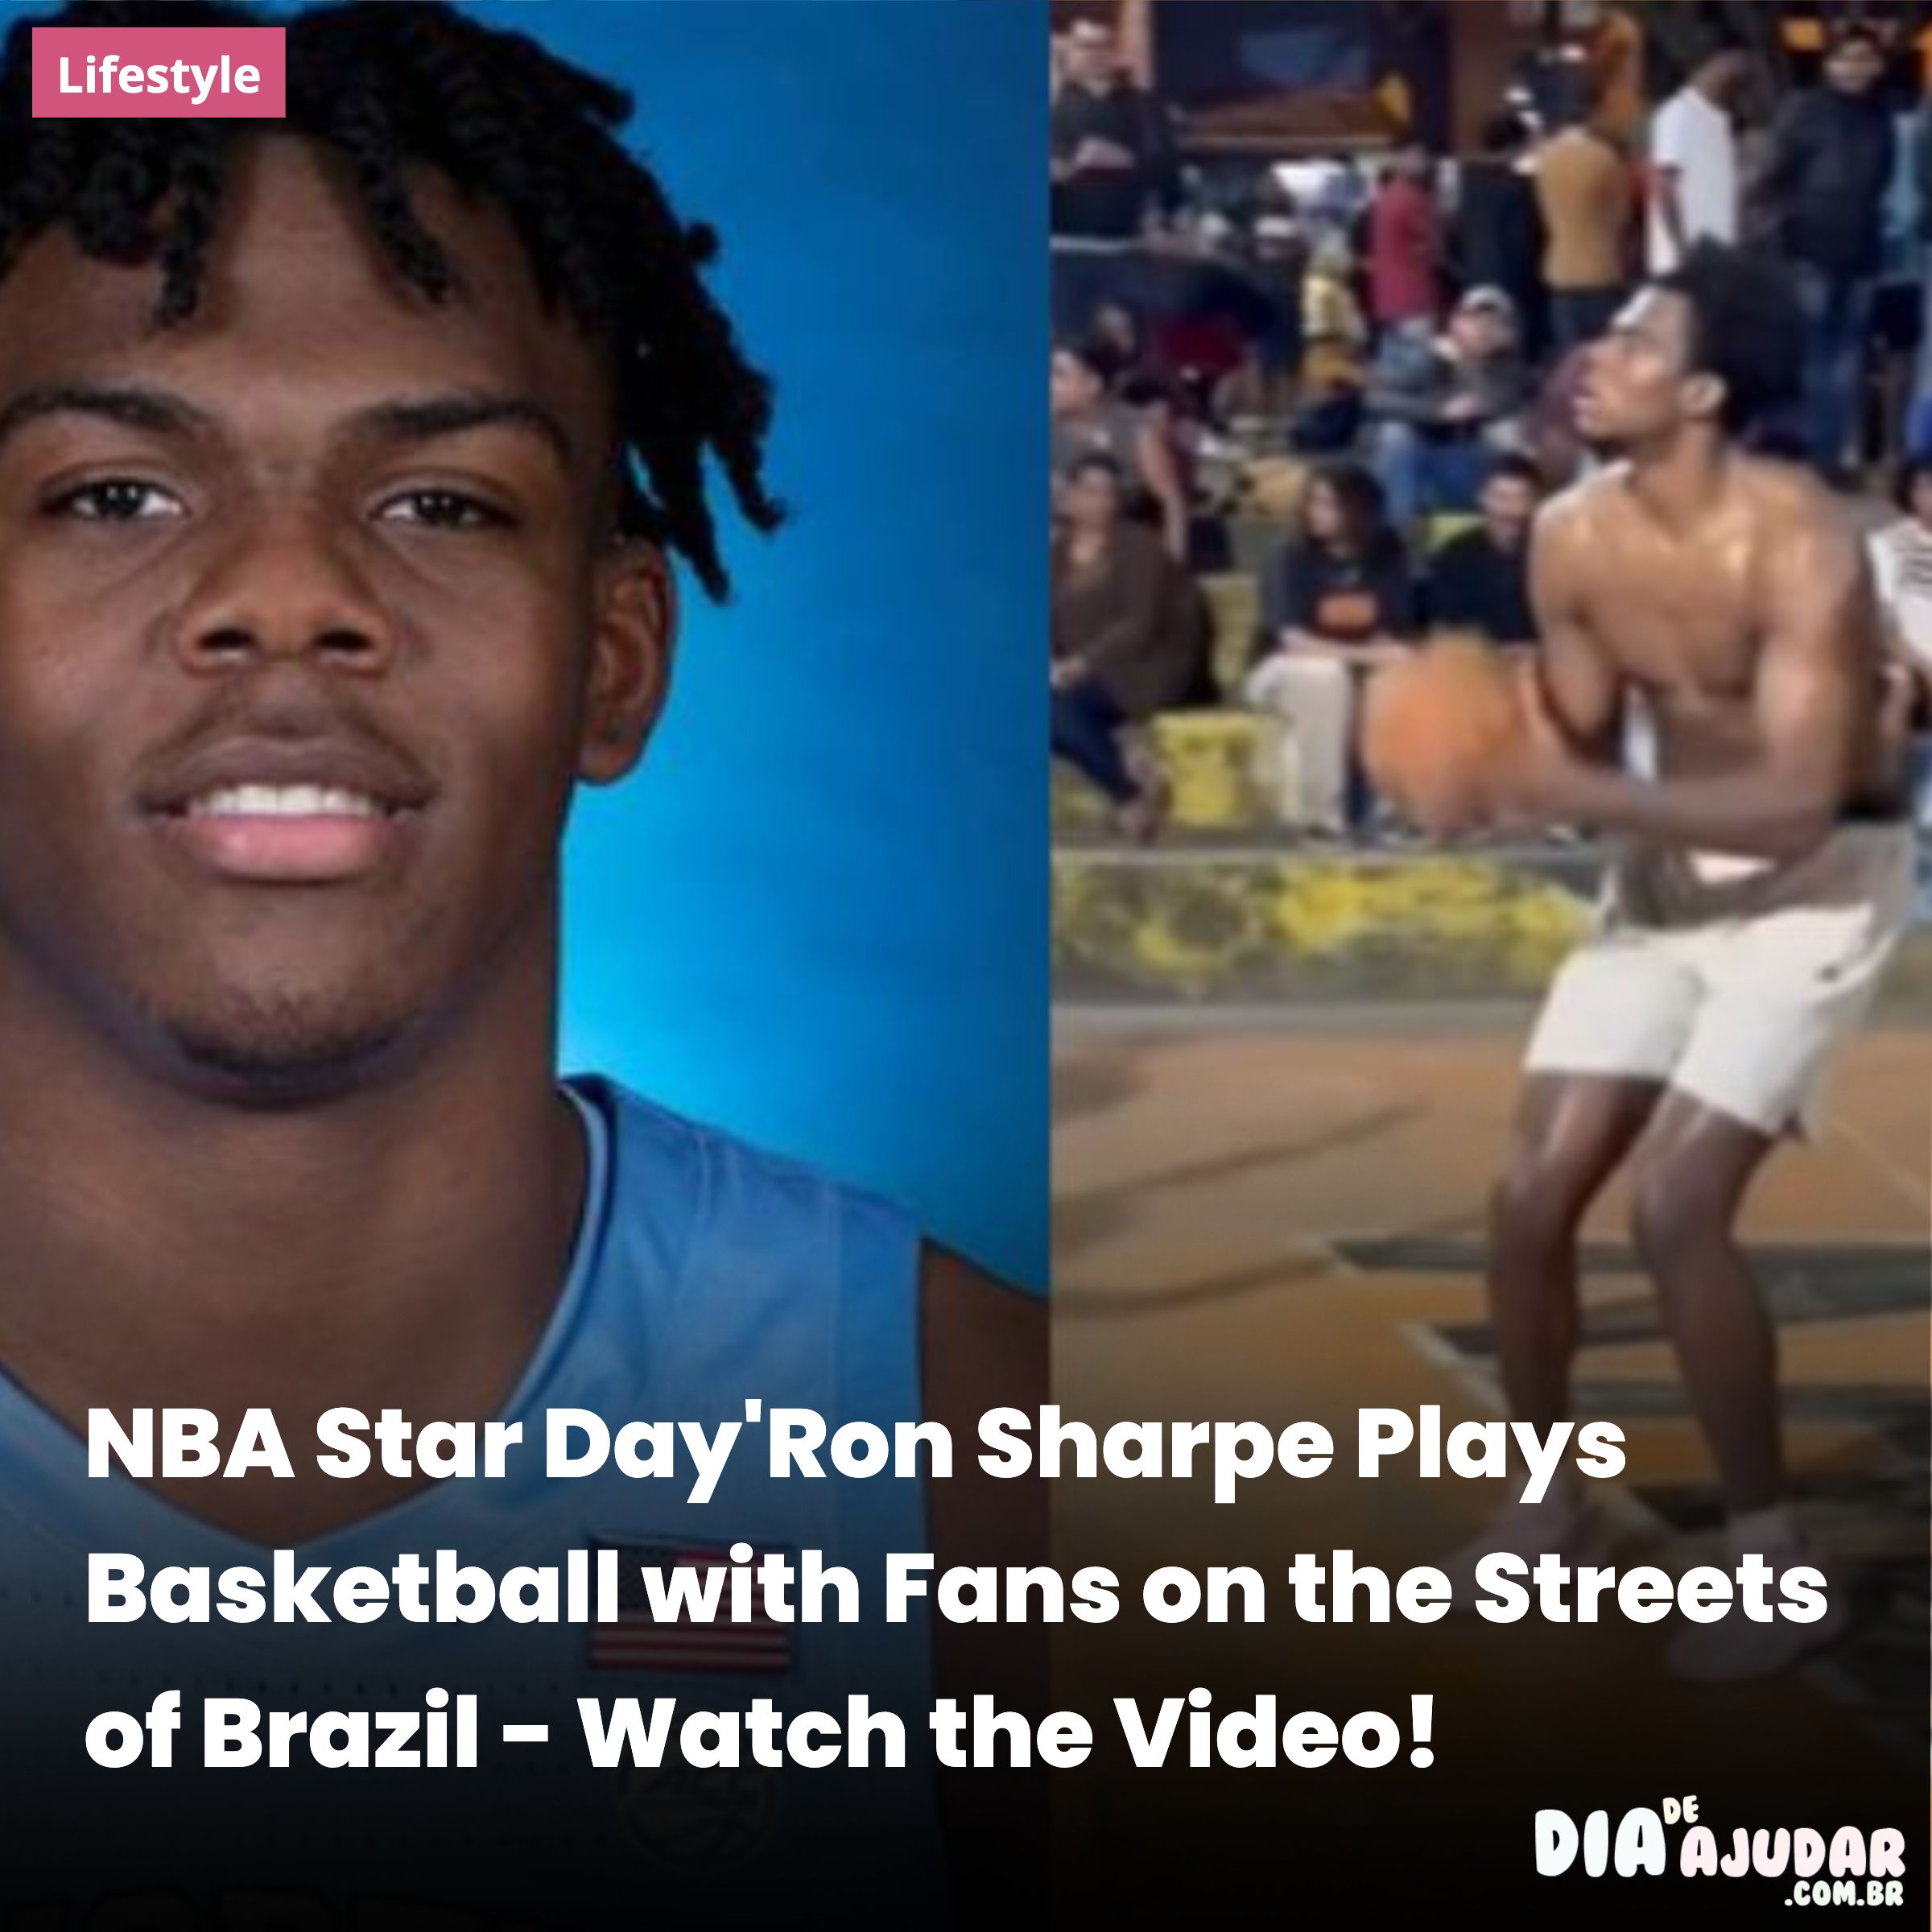 Day'Ron Sharpe shows up at Brazil's streetball mecca and puts on a